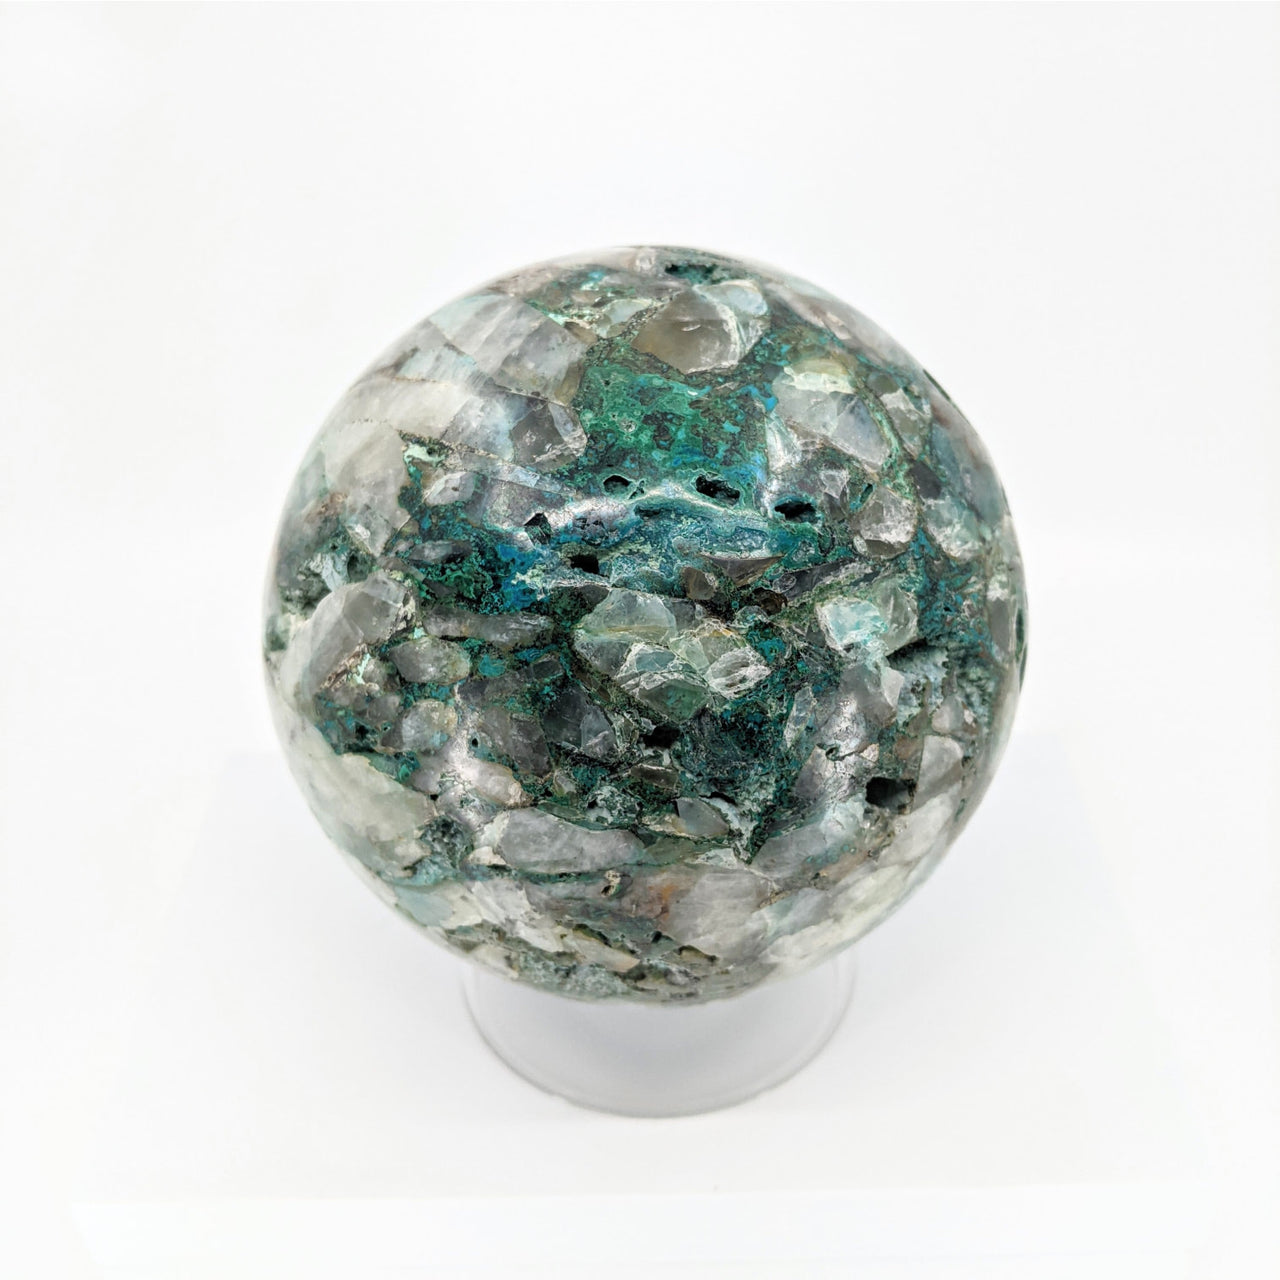 Chrysocolla Sphere + Stand, Huge 10 lb Display Specimen S035 - Green and White Marble Sphere